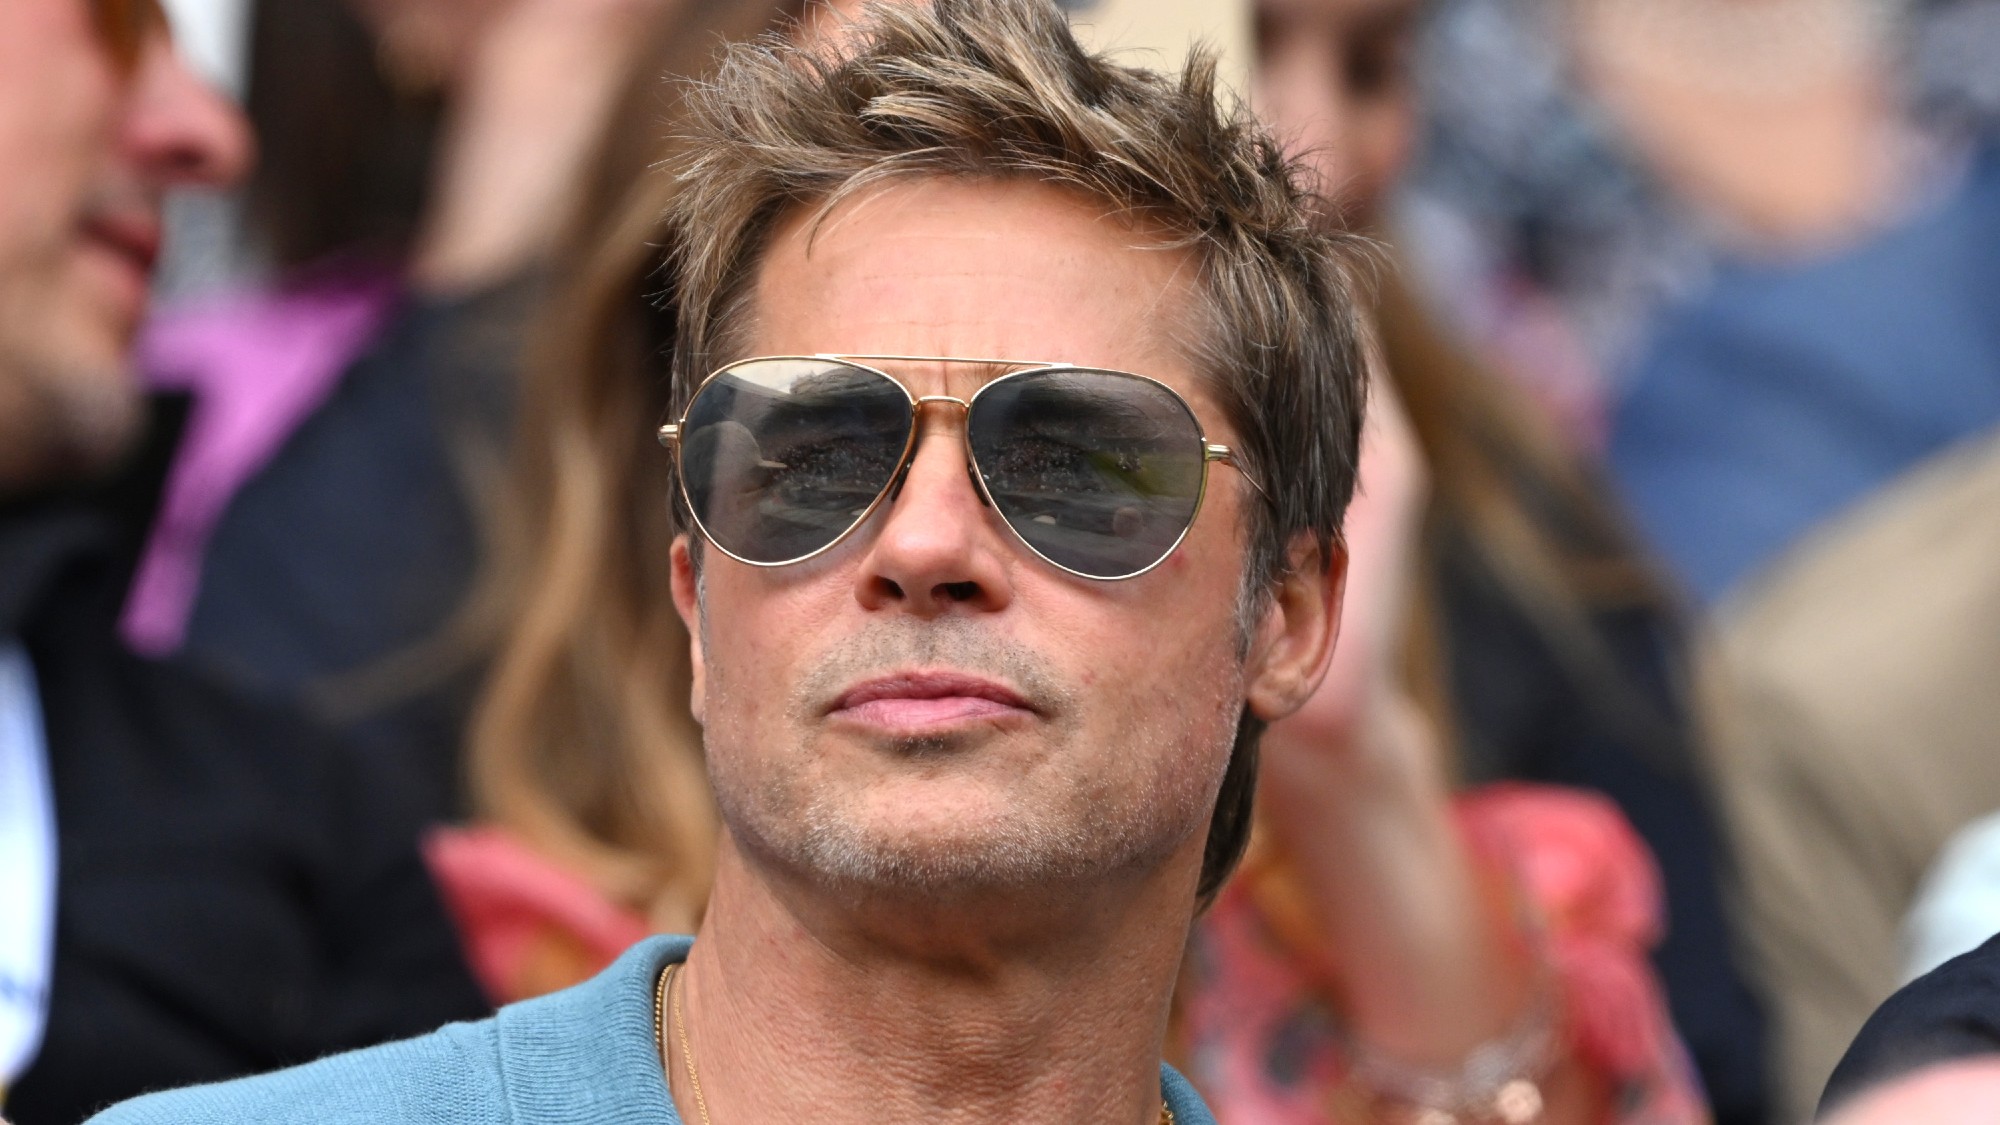 Brad Pitt says he has 'no style' as he's 'older' and 'crankier